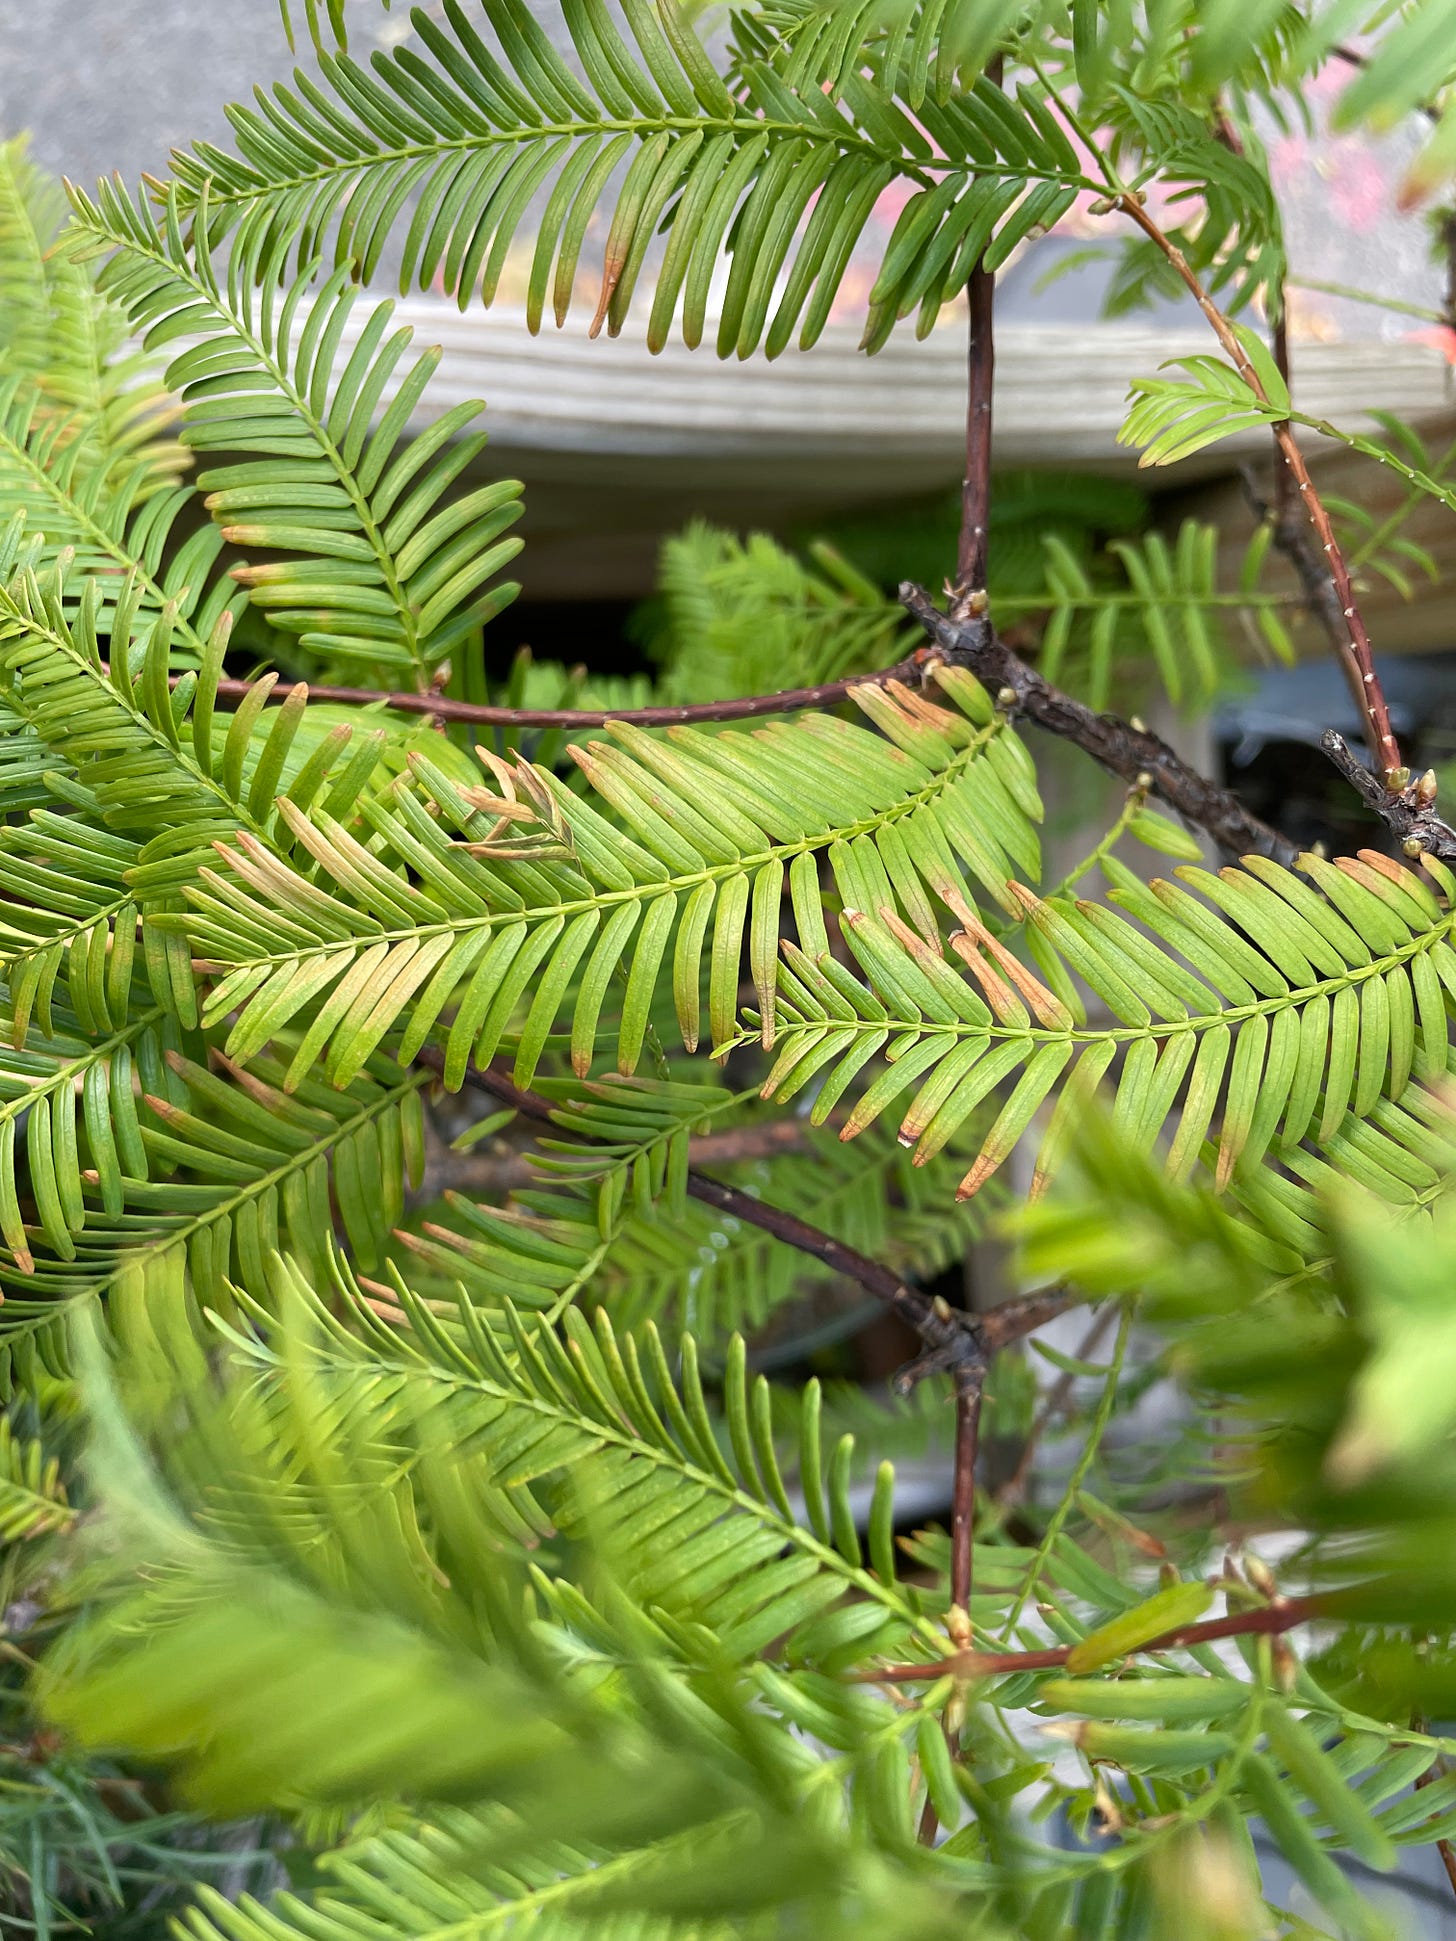 ID: Up close photo of dawn redwood foliage tinged with brown in spots